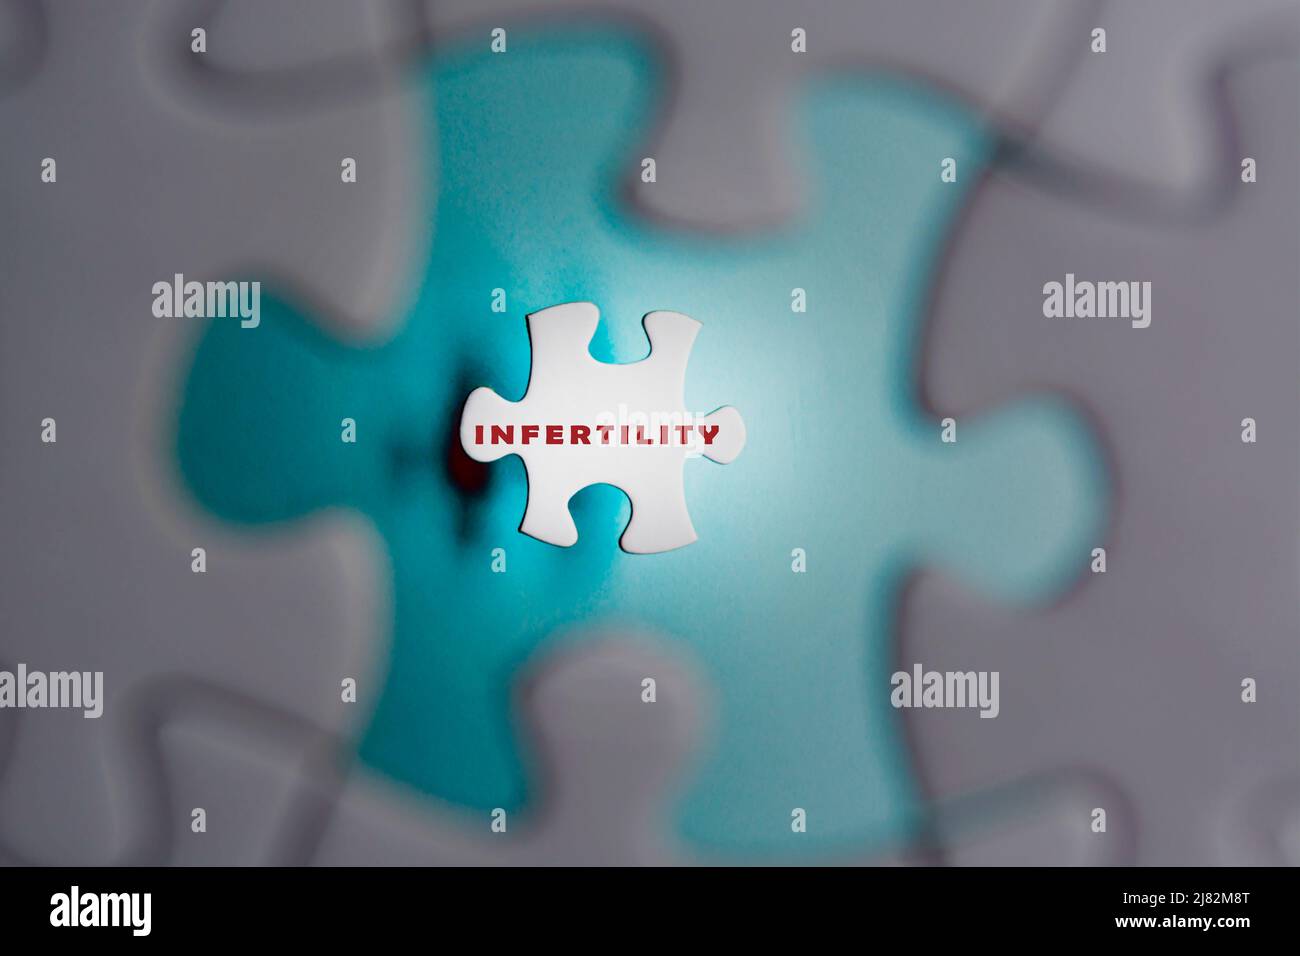 Infertility word on puzzle pieces isolated on blue background. IVF Treatment. Stock Photo